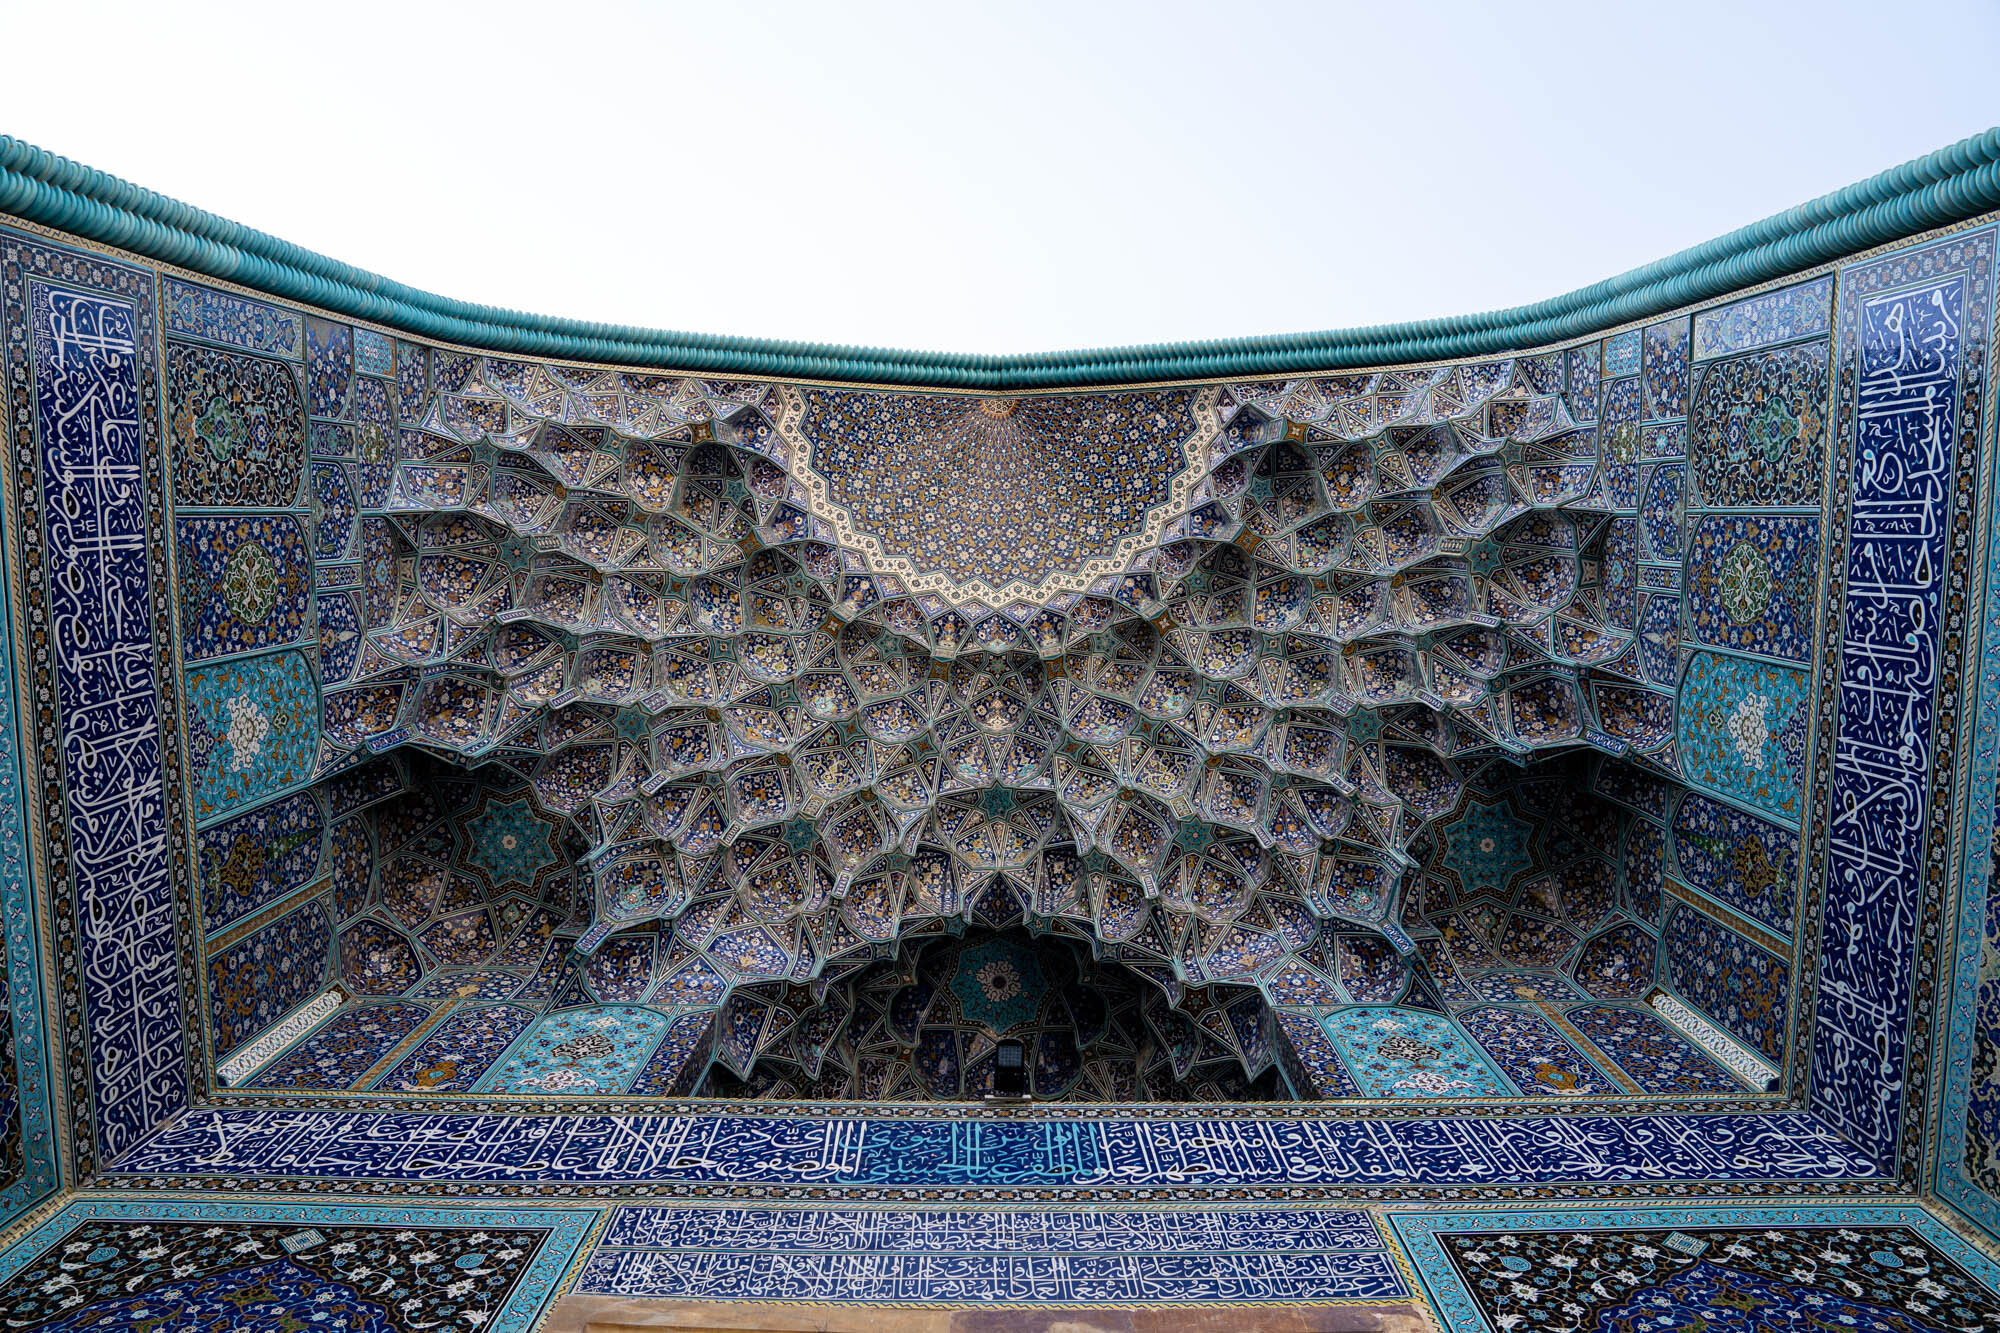  Ceiling details from the Shah Mosque, Isfahan 